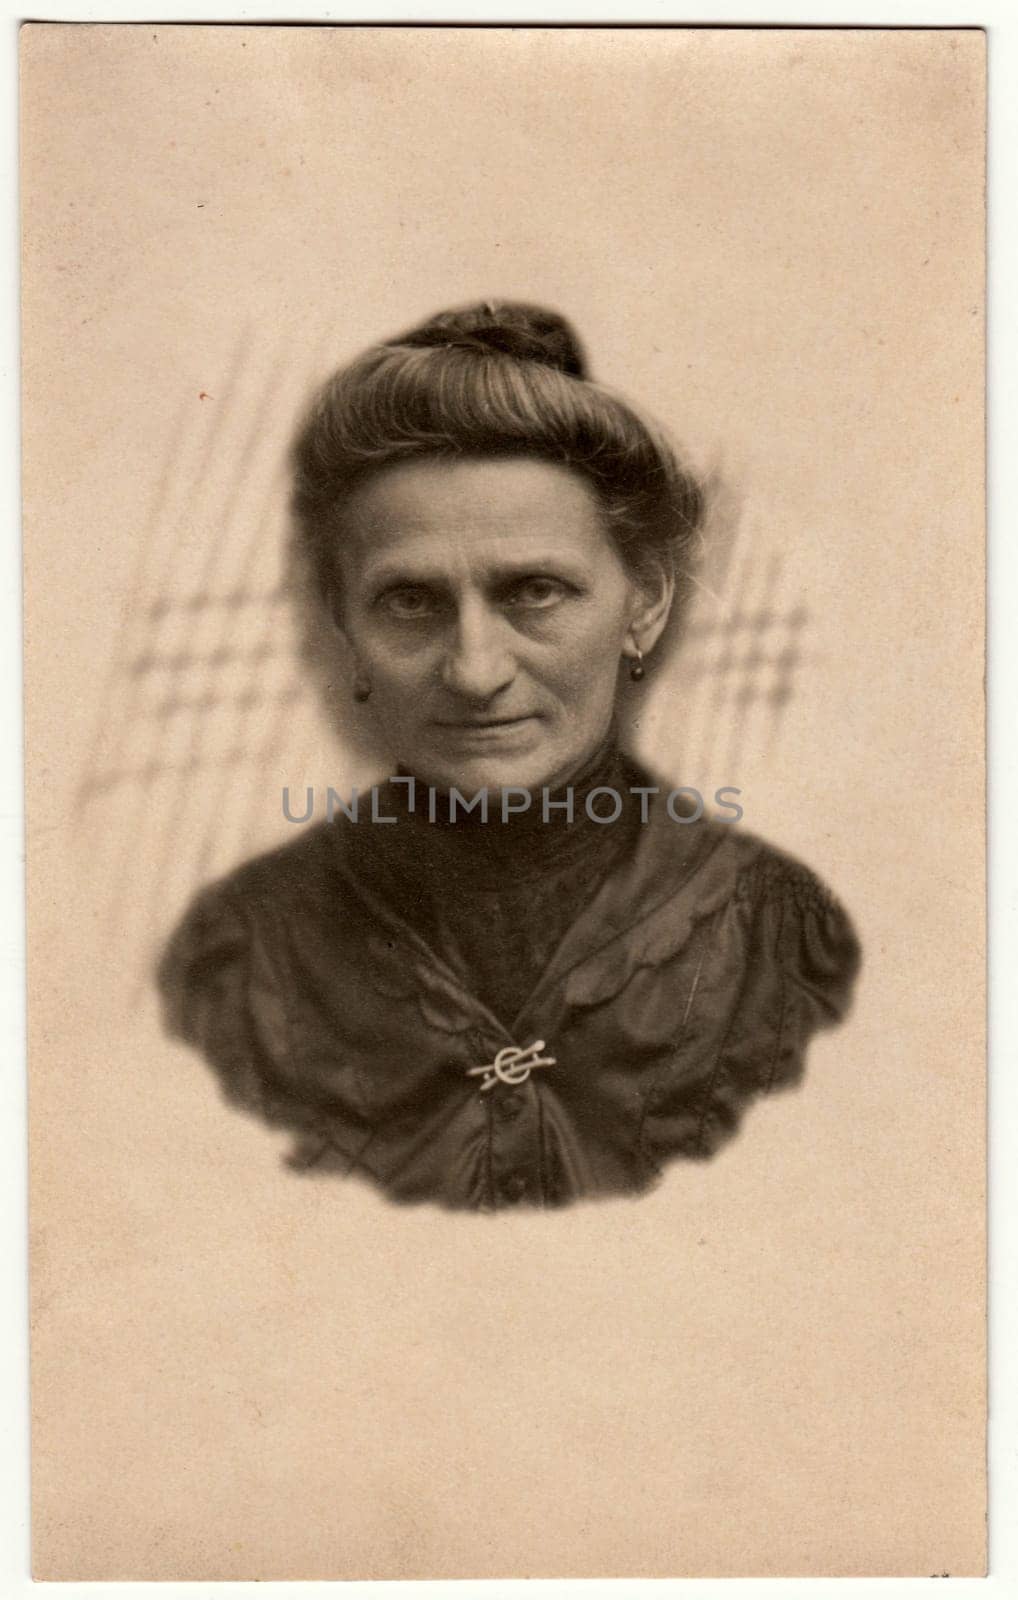 Vintage photo shows elderly woman - portrait in a photography studio. Woman with Edwardian hairstyle. Retro black and white studio photography with sepia effect. Head is drawn to body. by roman_nerud